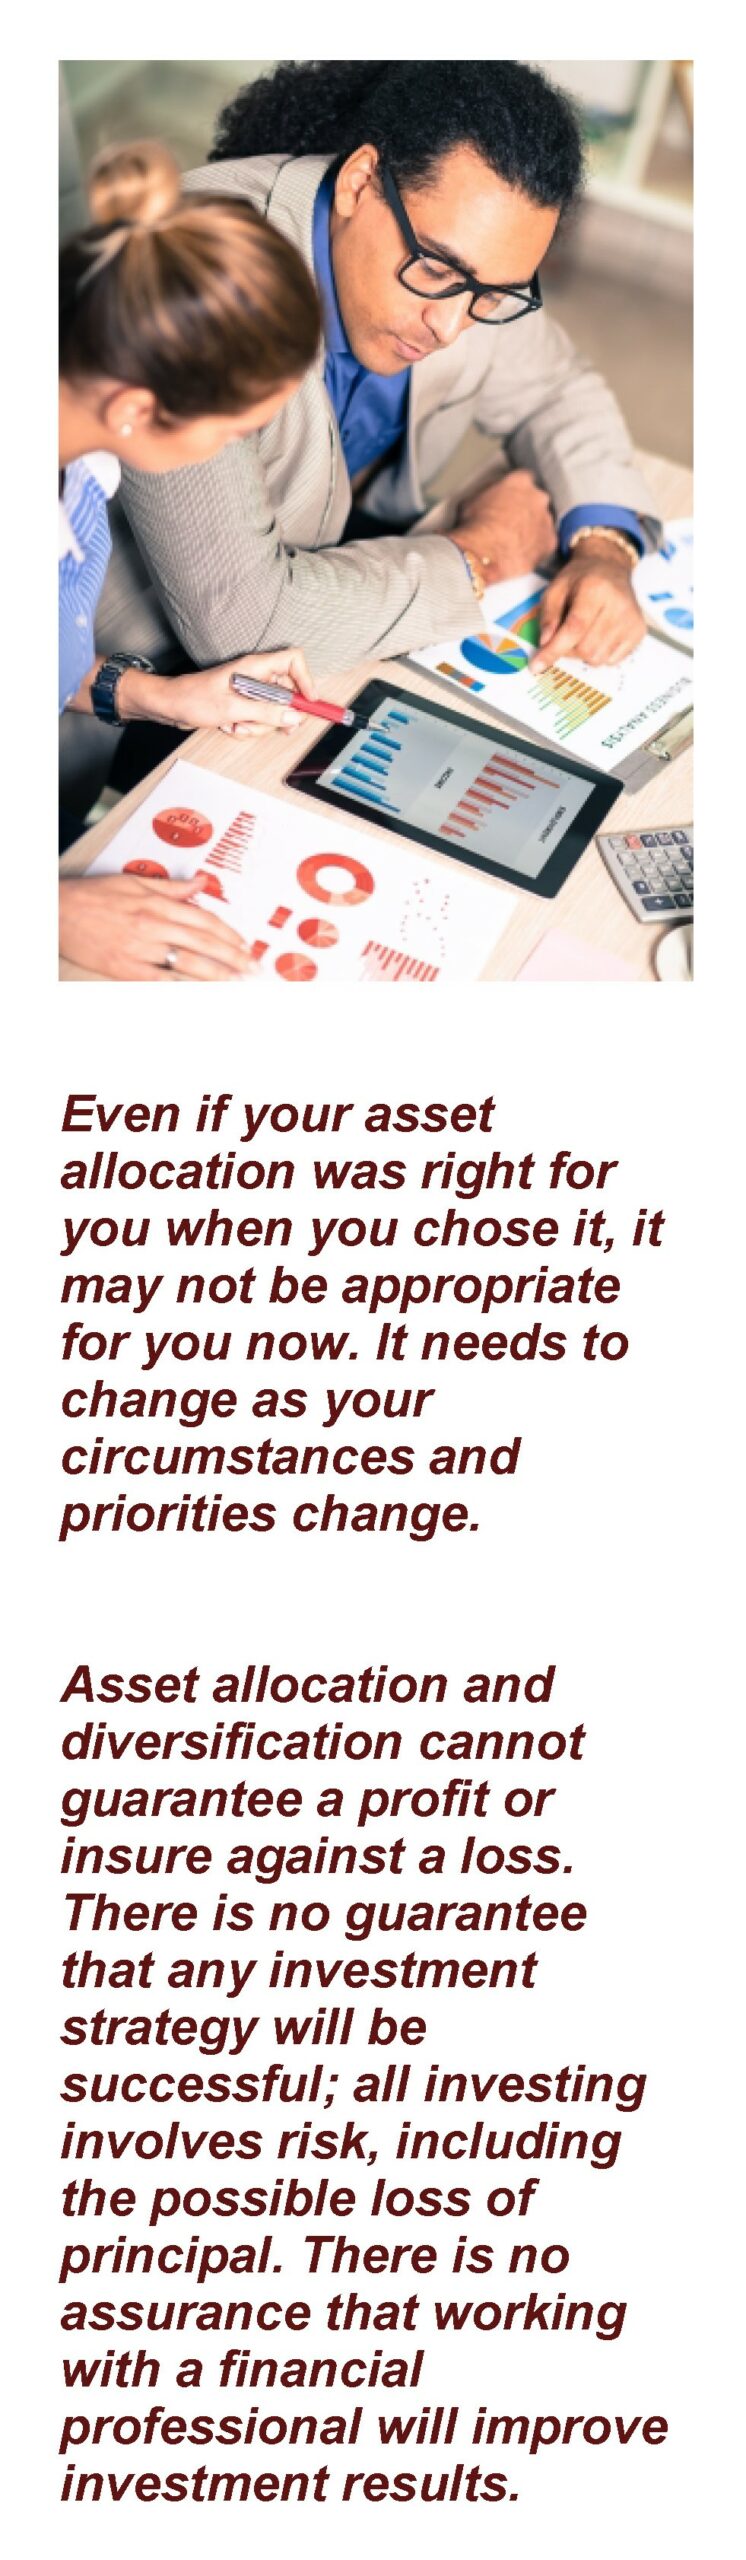 Picture of couple reviewing their investment statements. The caption says "Even if your asset allocation was right for you when you chose it, it may not be appropriate for you now. It needs to change as your circumstances and priorities change. Asset allocation and diversification cannot guarantee a profit or insure against a loss. There is no guarantee that any investment strategy will be successful; all investing involves risk, including the possible loss of principal. There is no assurance that working with a financial professional will improve investment results." Article Title: Balancing Your Investment Choices with Asset Allocation